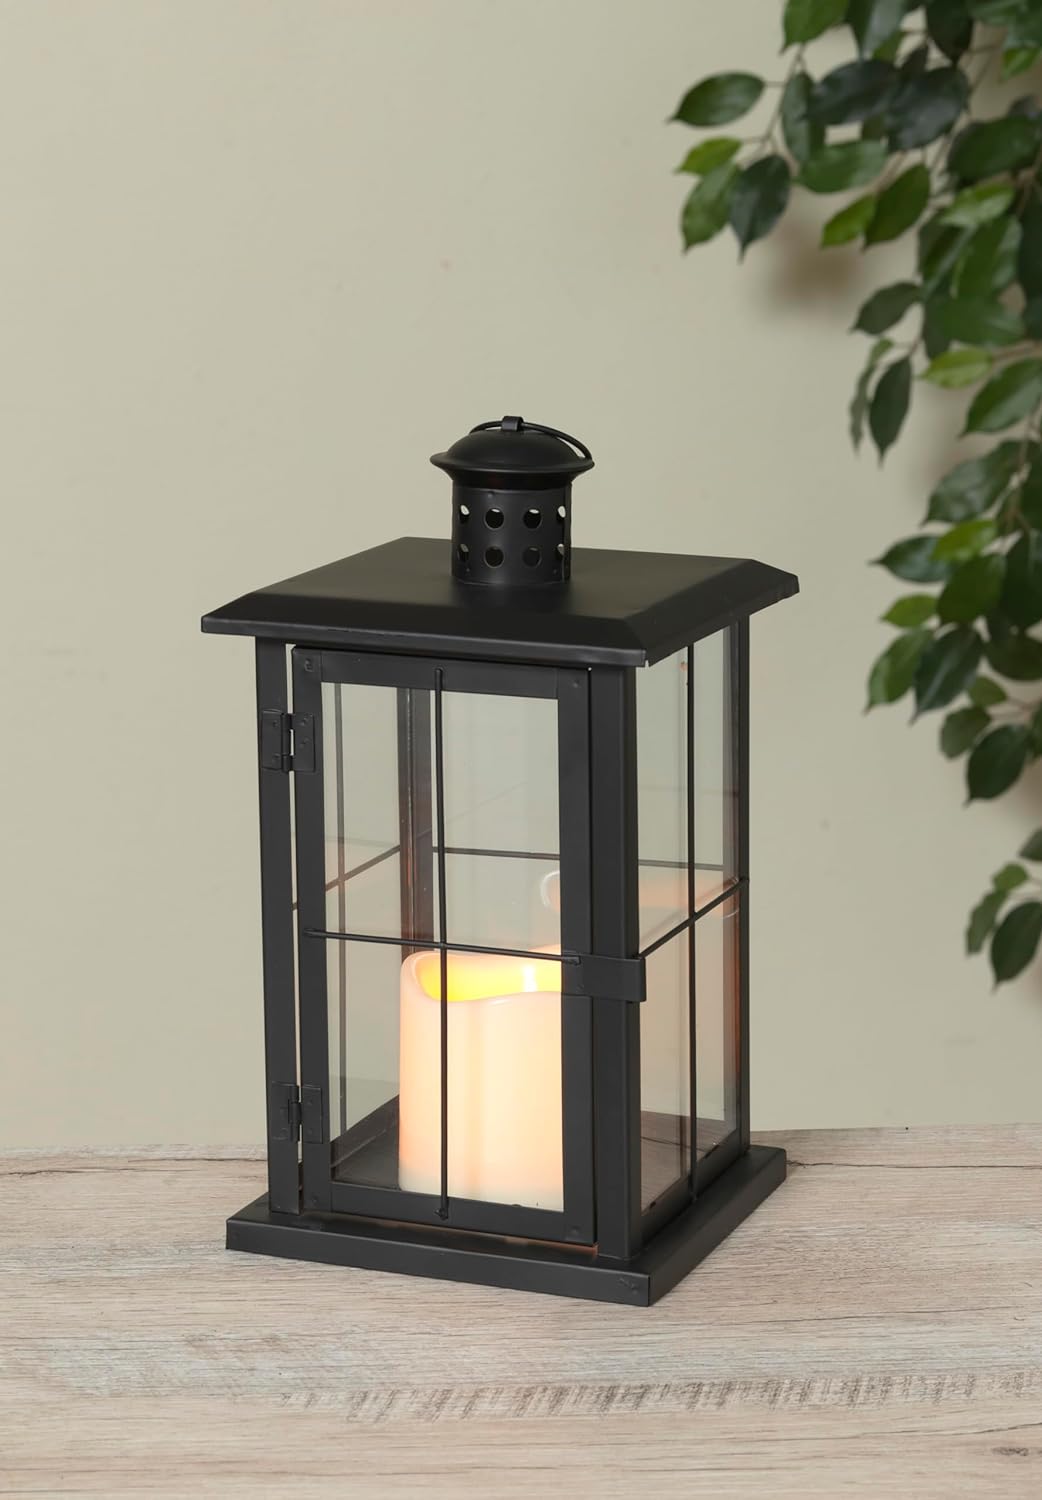 Glass and Black Metal Candle Lantern, Battery Operated with Timer, 10.5 Inches High